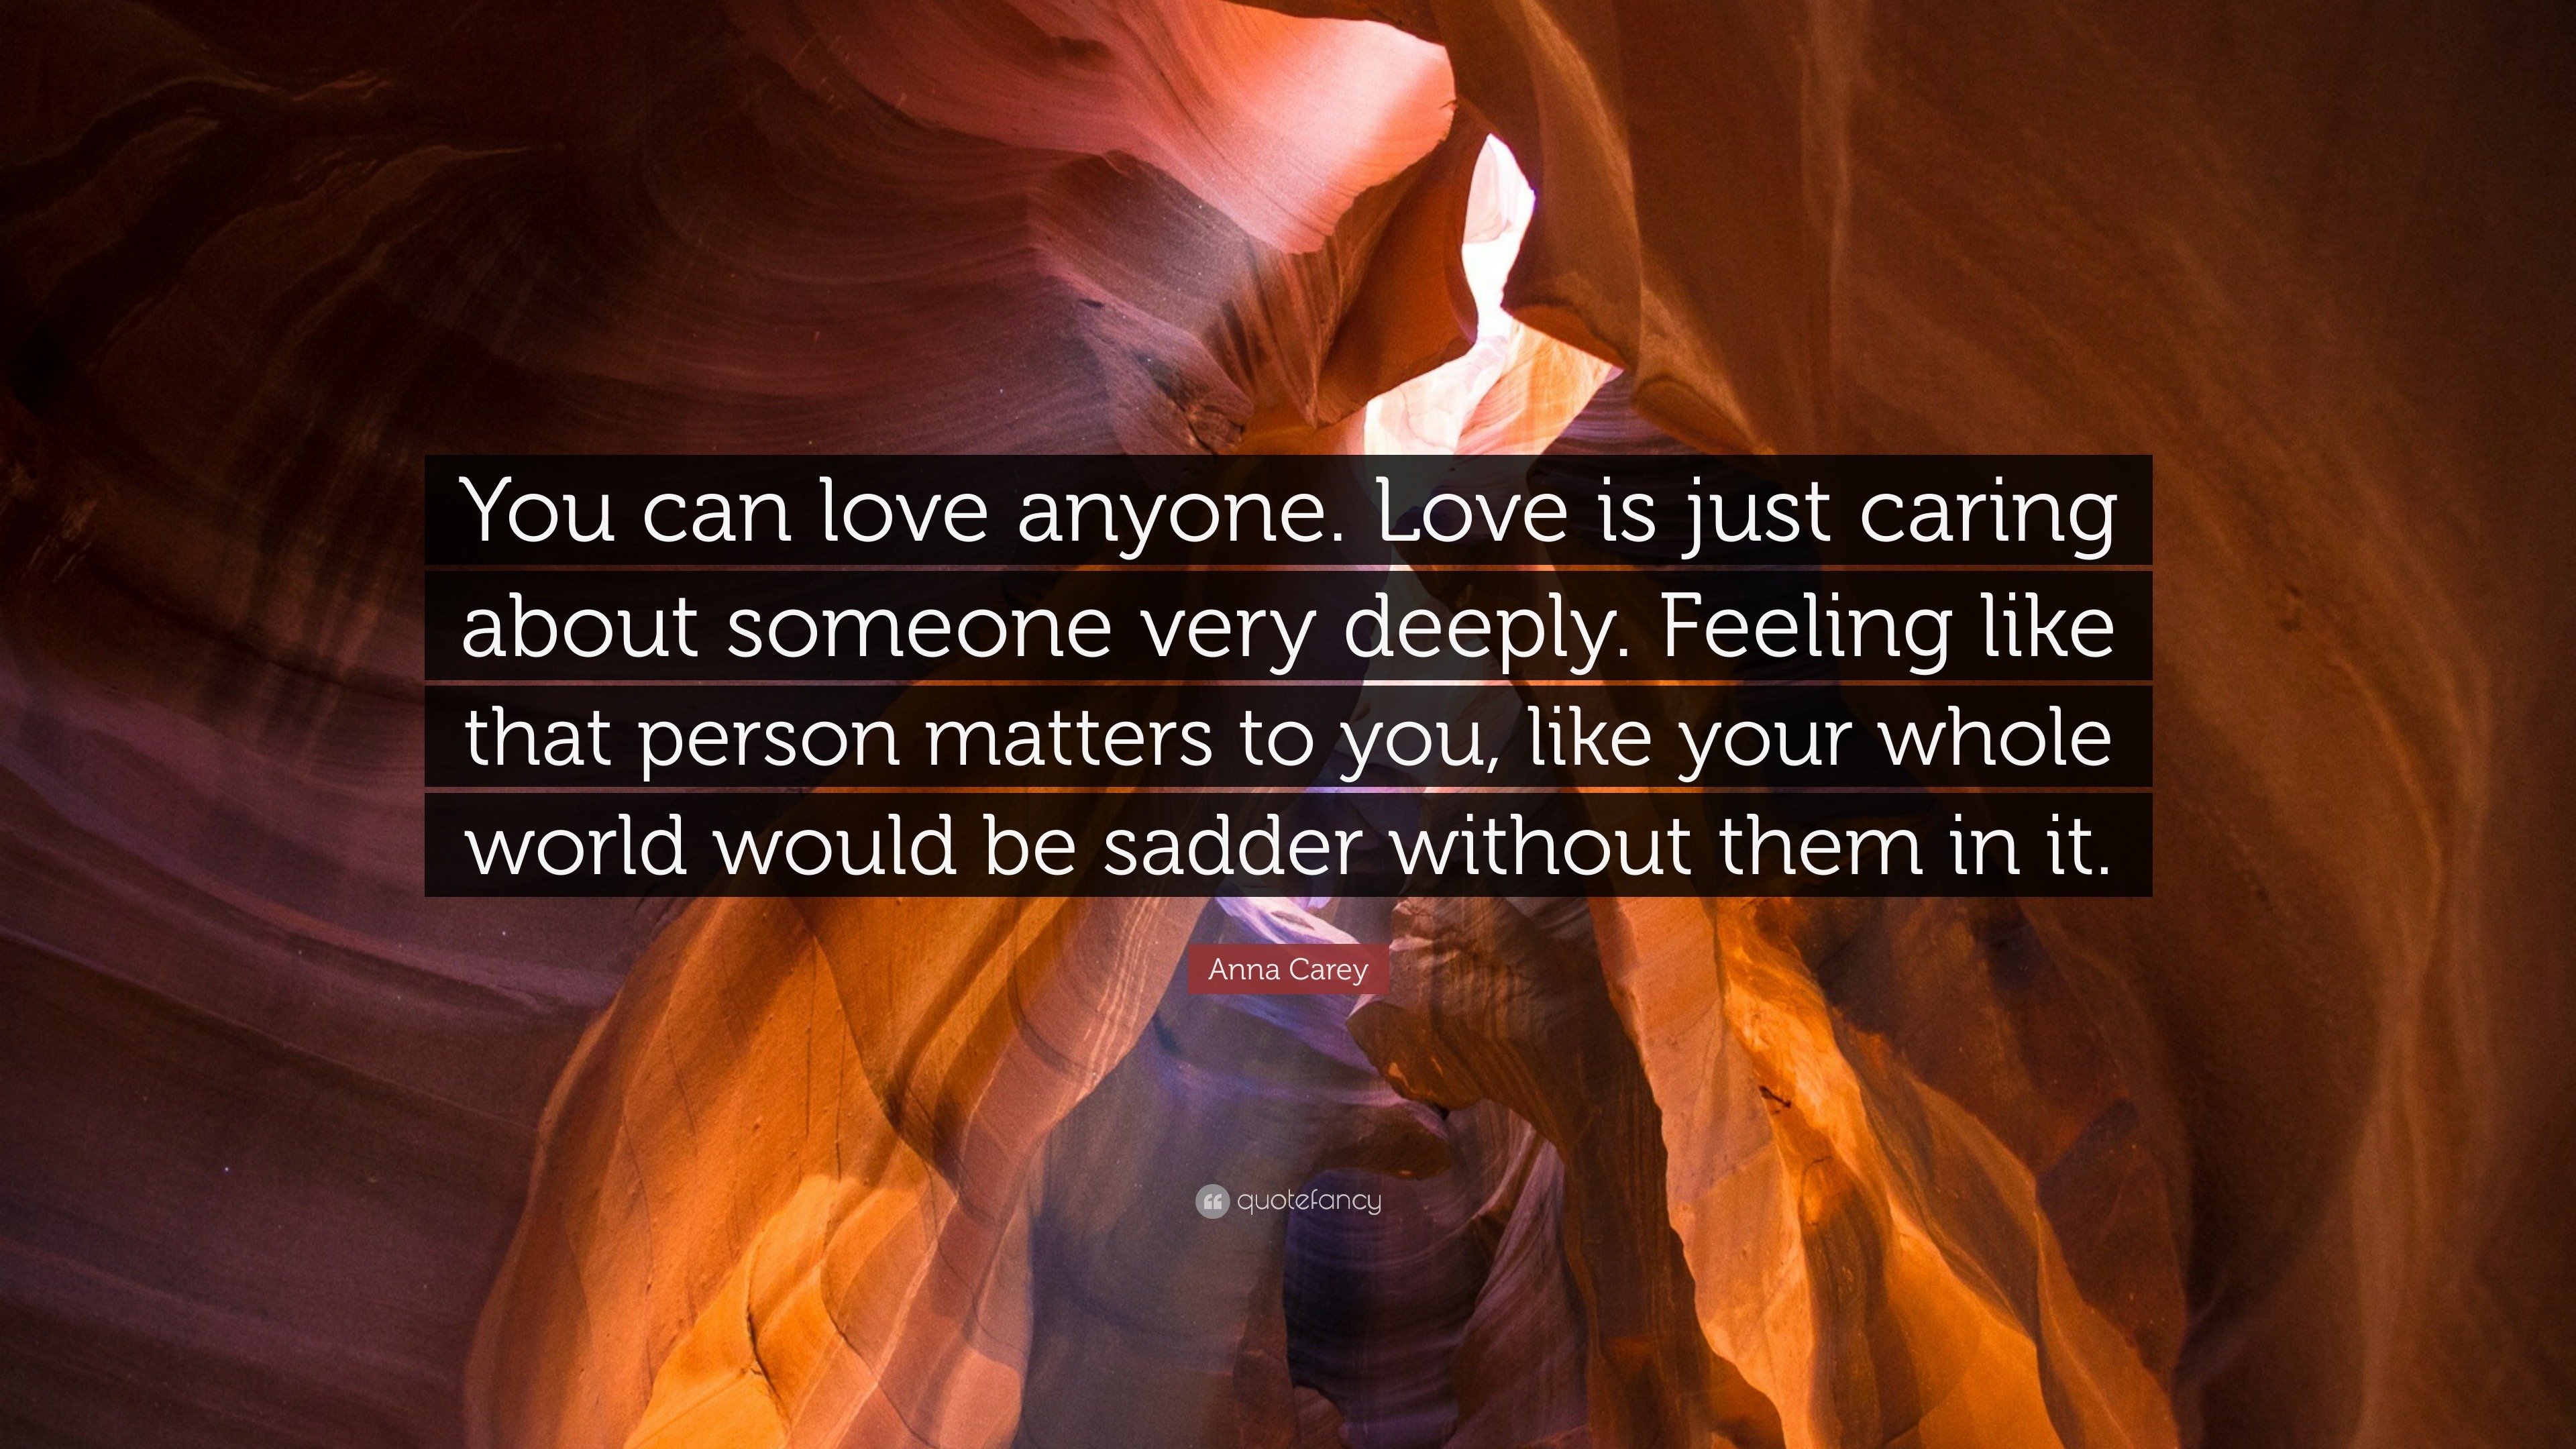 Anna Carey Quote “You can love anyone Love is just caring about someone